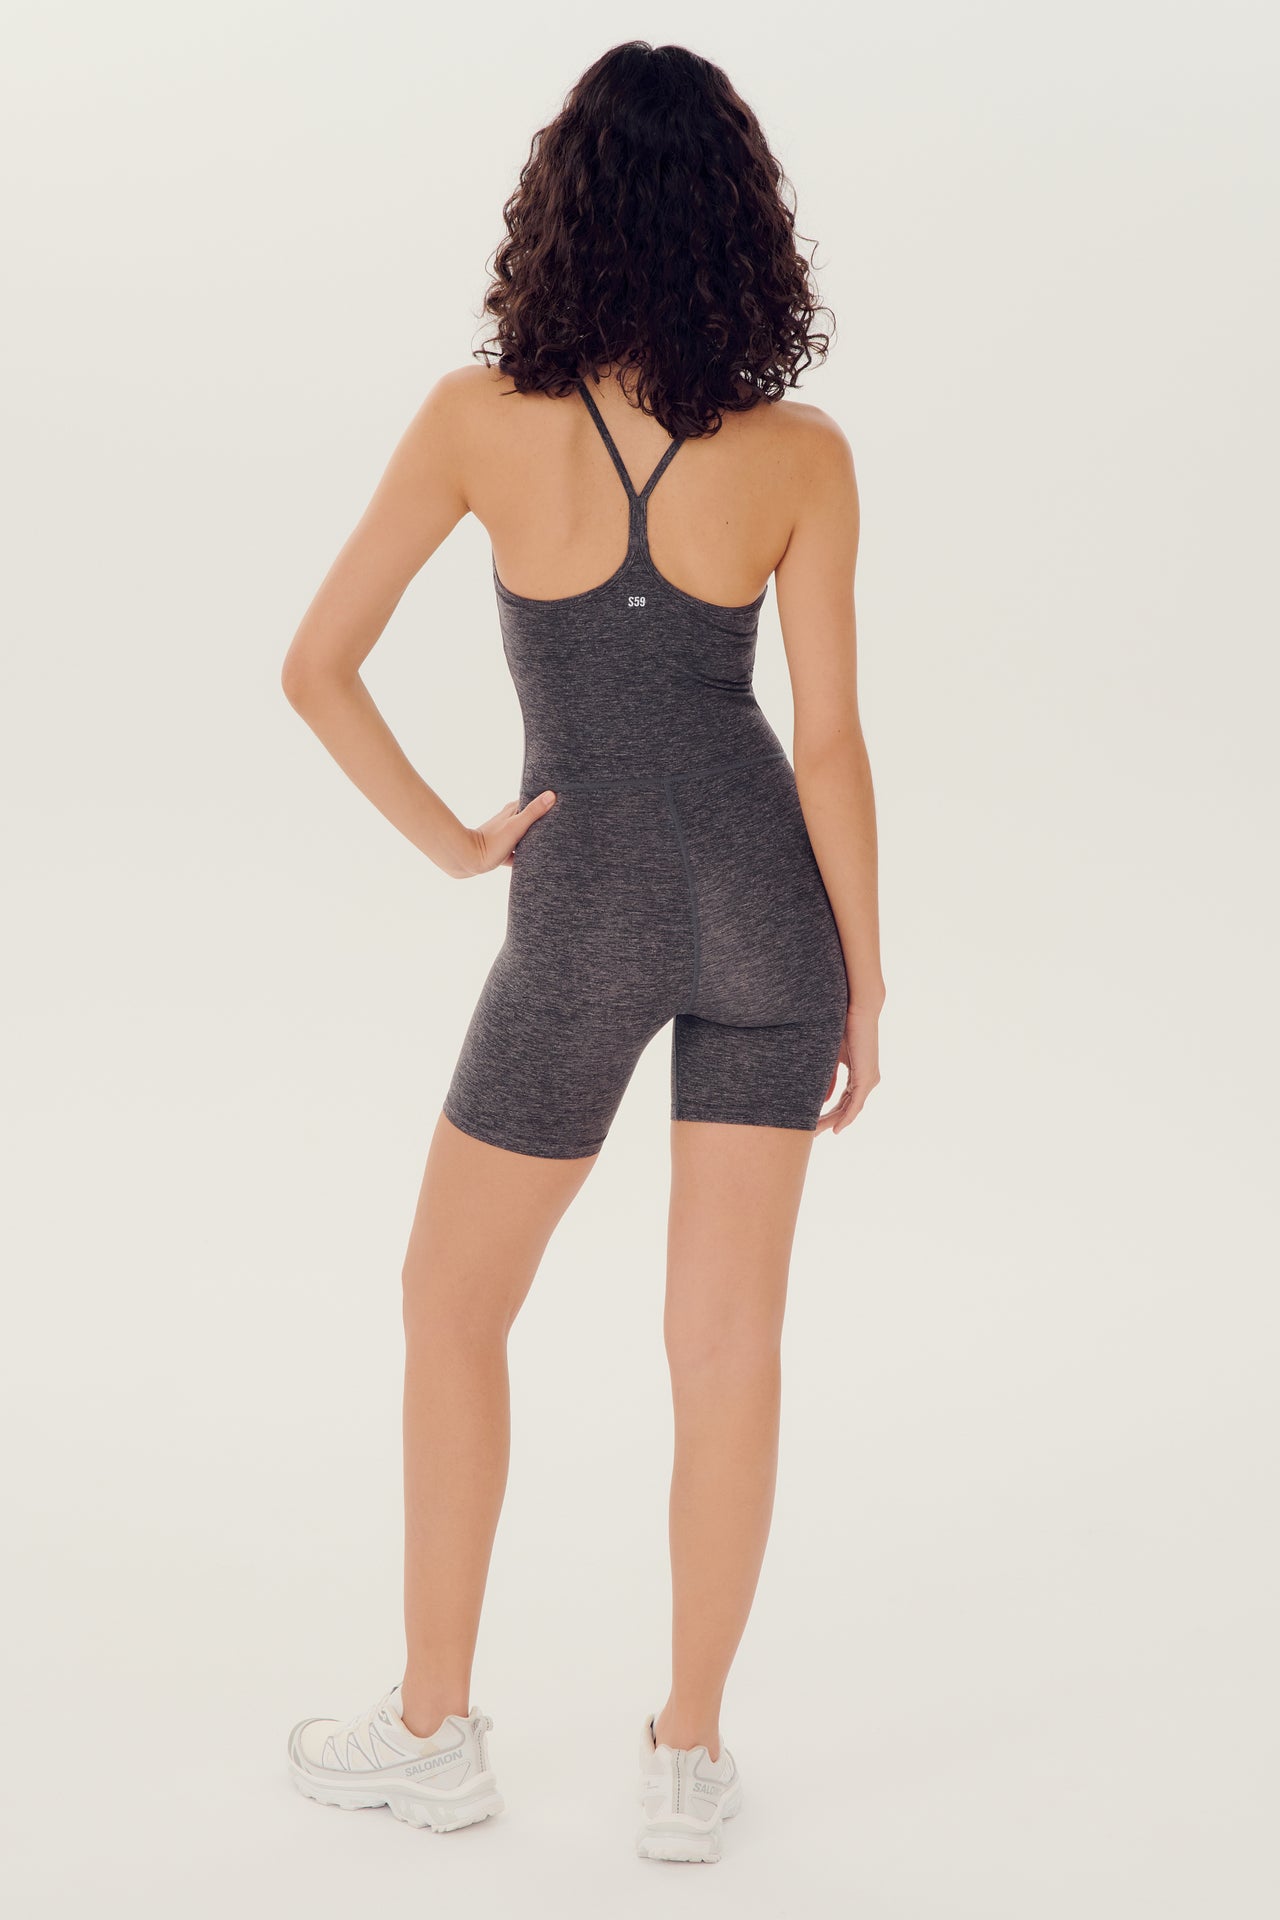 Full back view of girl wearing grey mid thigh spaghetti strap body suit/one piece